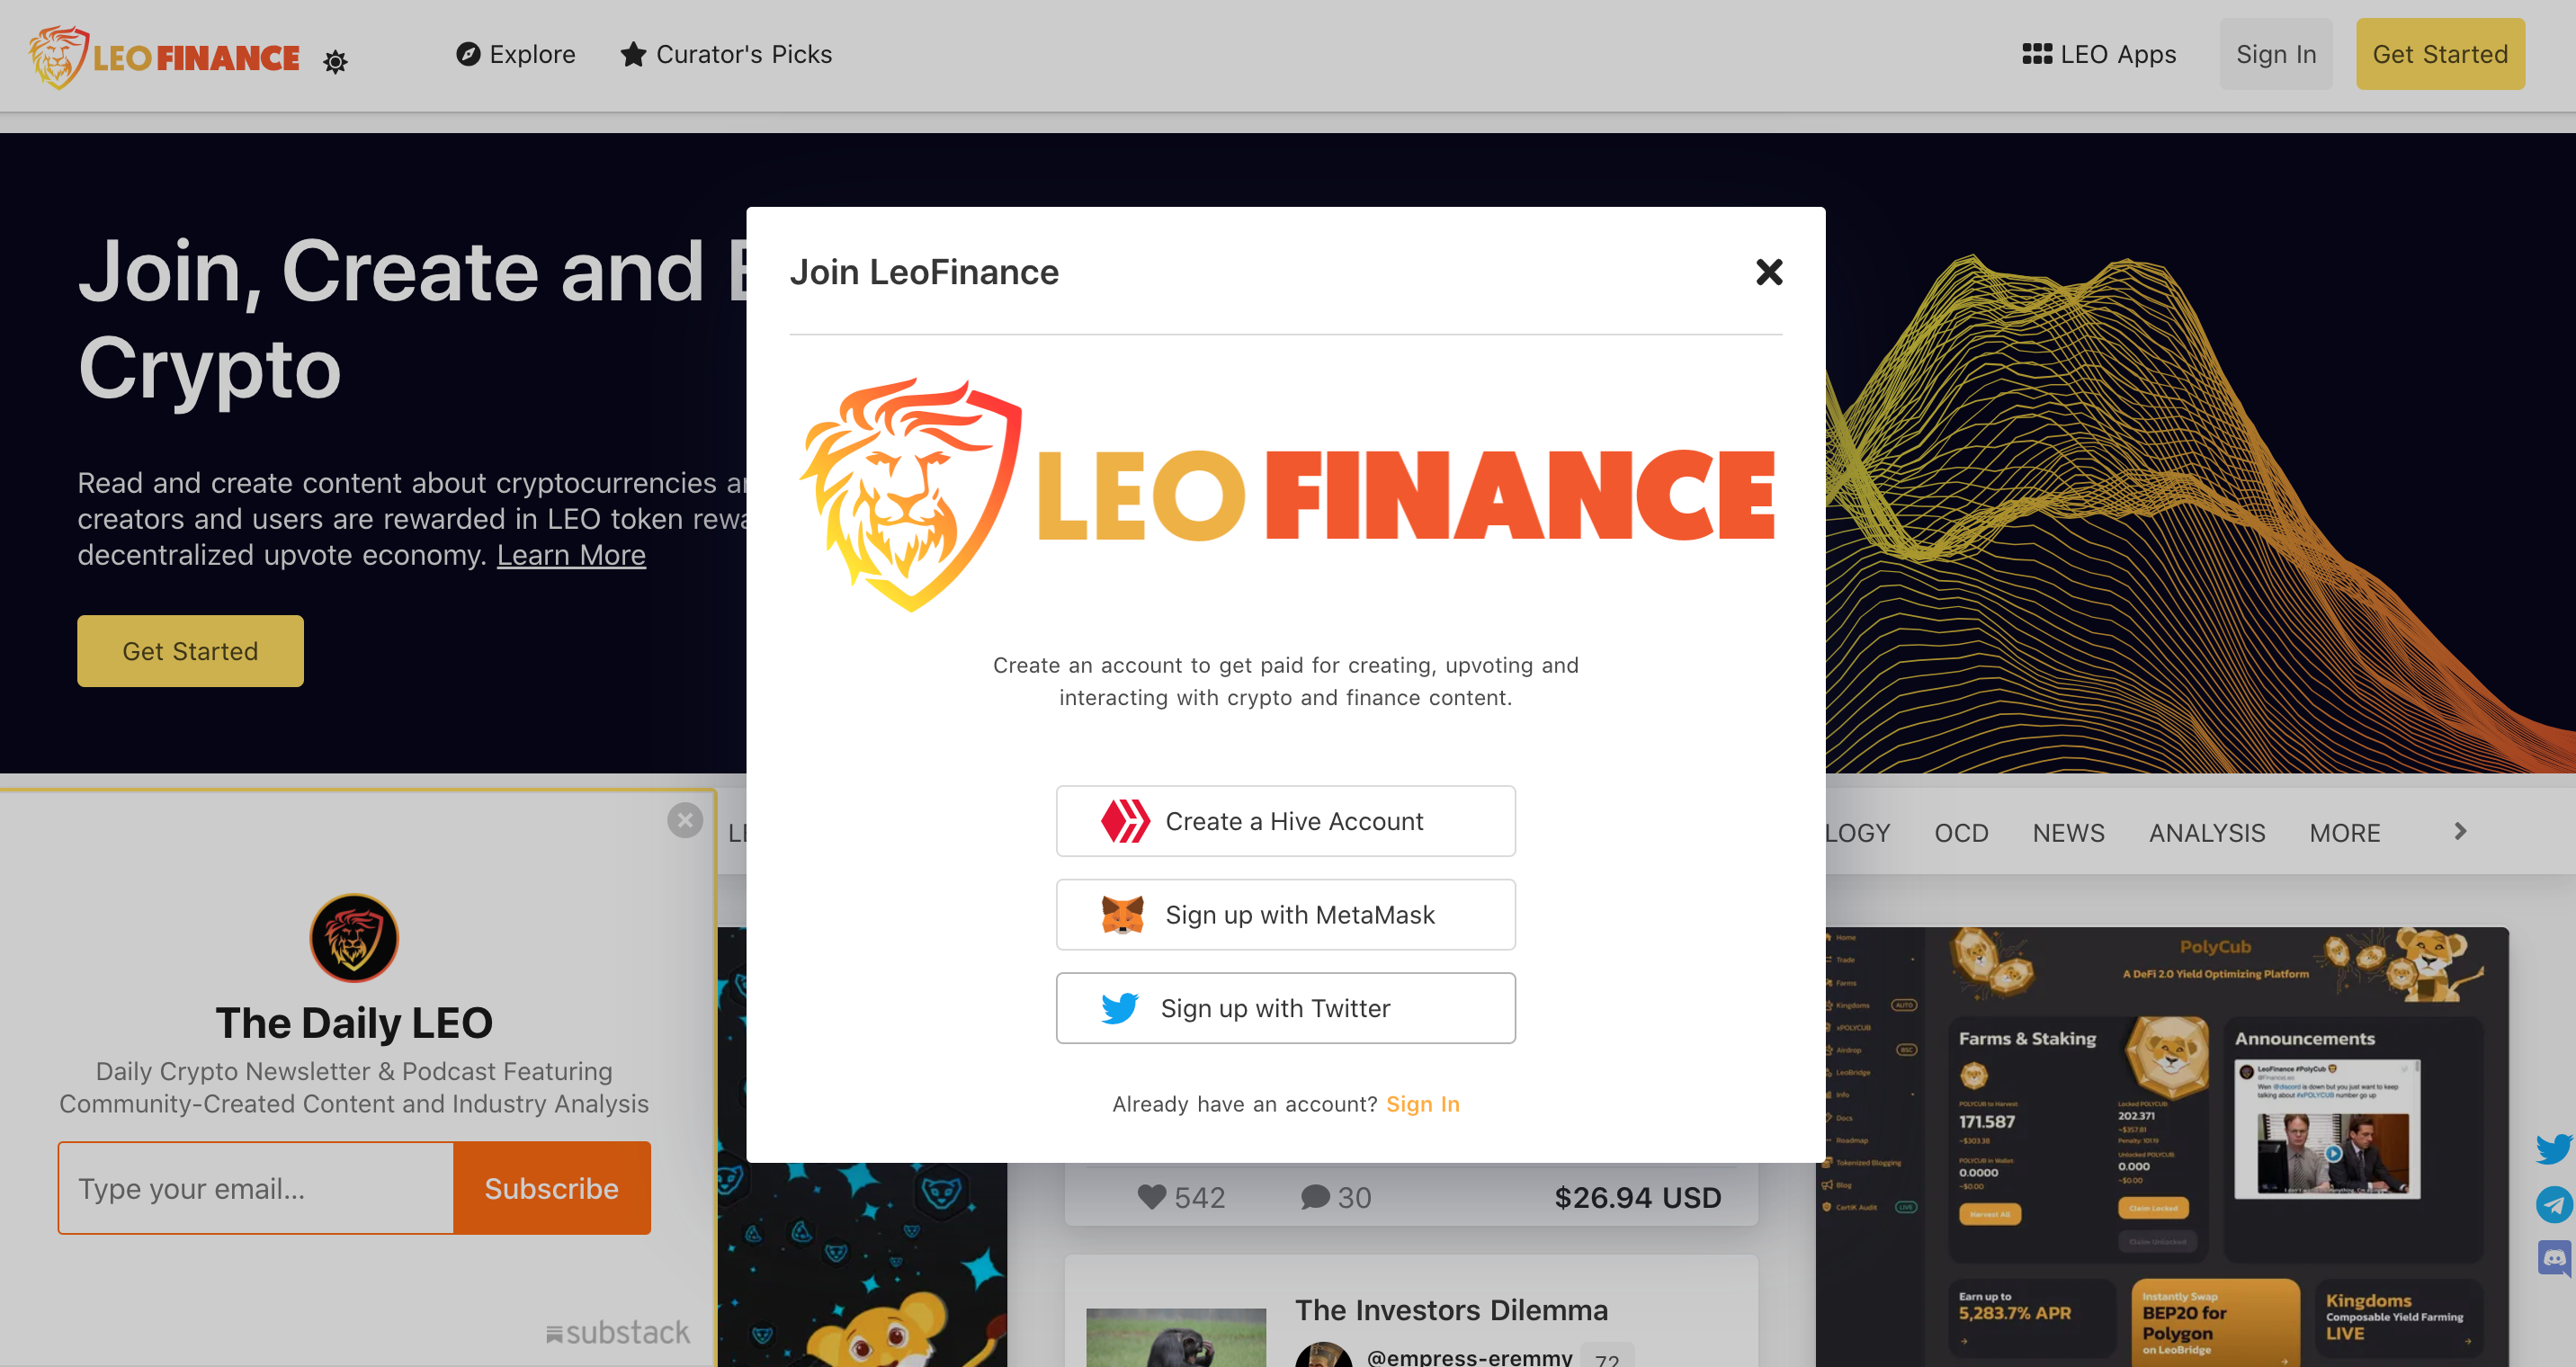 The LeoFinance home page where the get started button is located at the top.